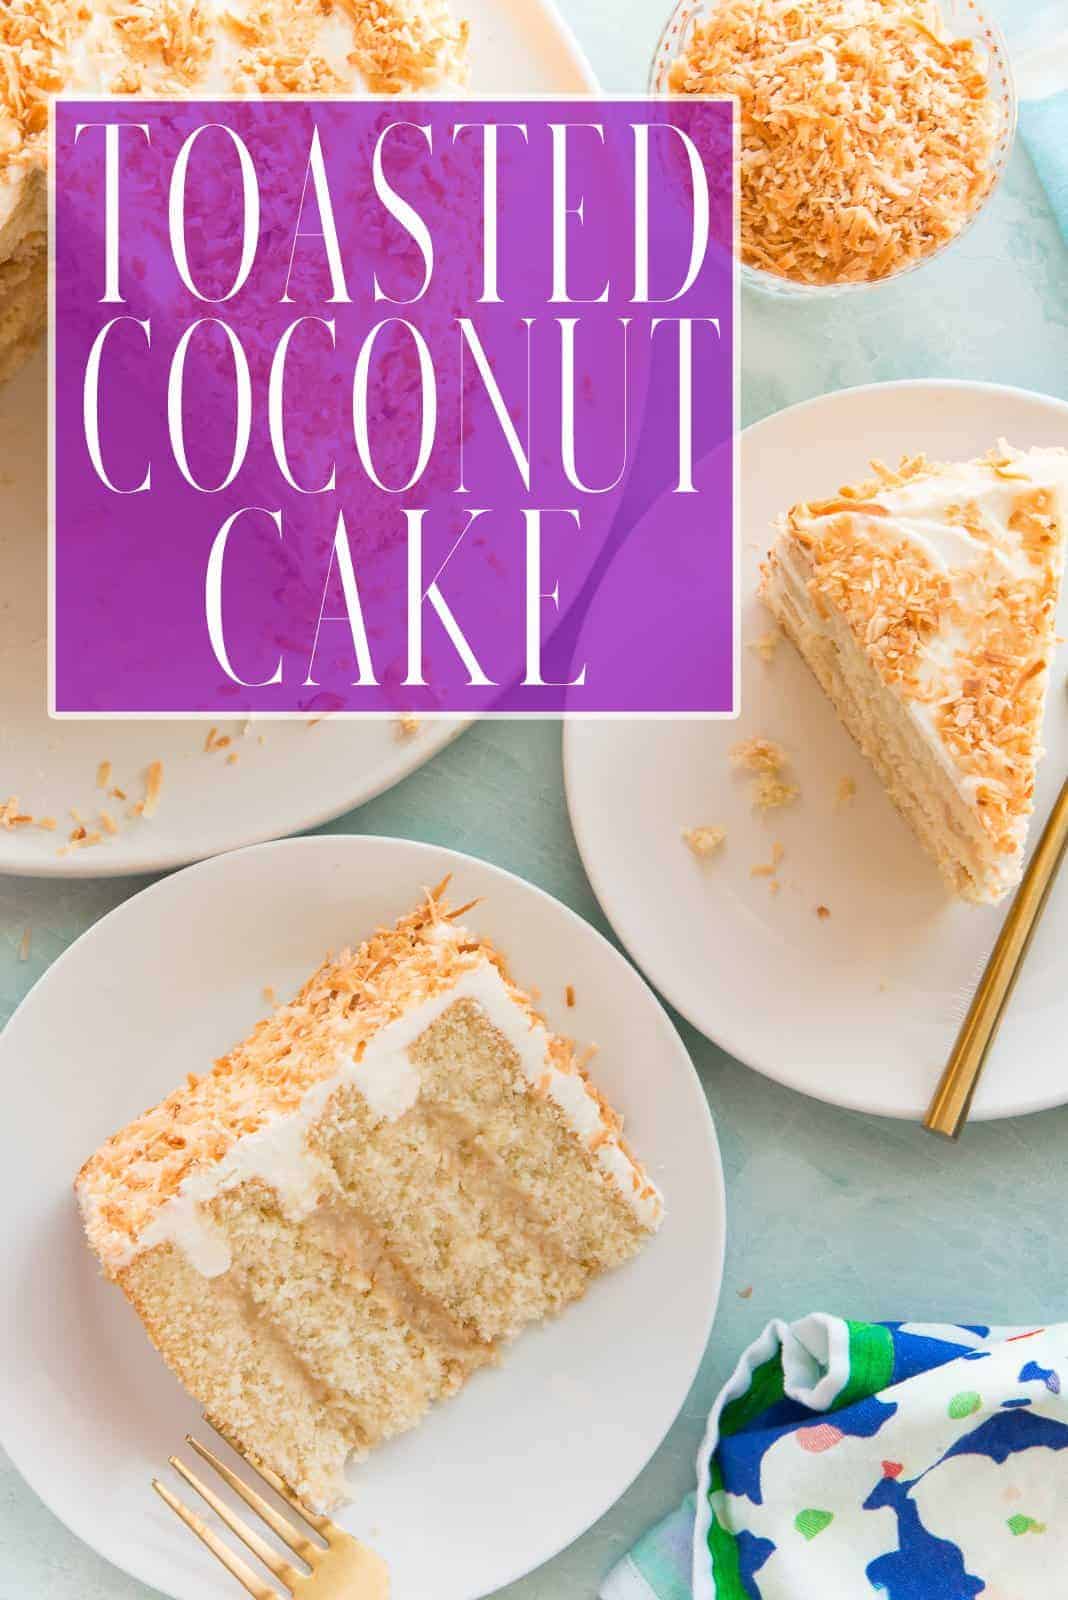 This Toasted Coconut Cake has layers upon layers of coconut flavor. A tender, moist coconut cake sandwiches creamy toasted coconut custard and is wrapped in a coconut buttercream before being garnished with more toasted coconut flakes. Perfect for springtime celebrations. #cake #coconutcake #layeredcakes #cakerecipe #dessertrecipe #sweets #Easterdessert #springdessertrecipe #baking #cakedecorating #coconutcustard #coconutpudding #buttercreamfrosting via @ediblesense